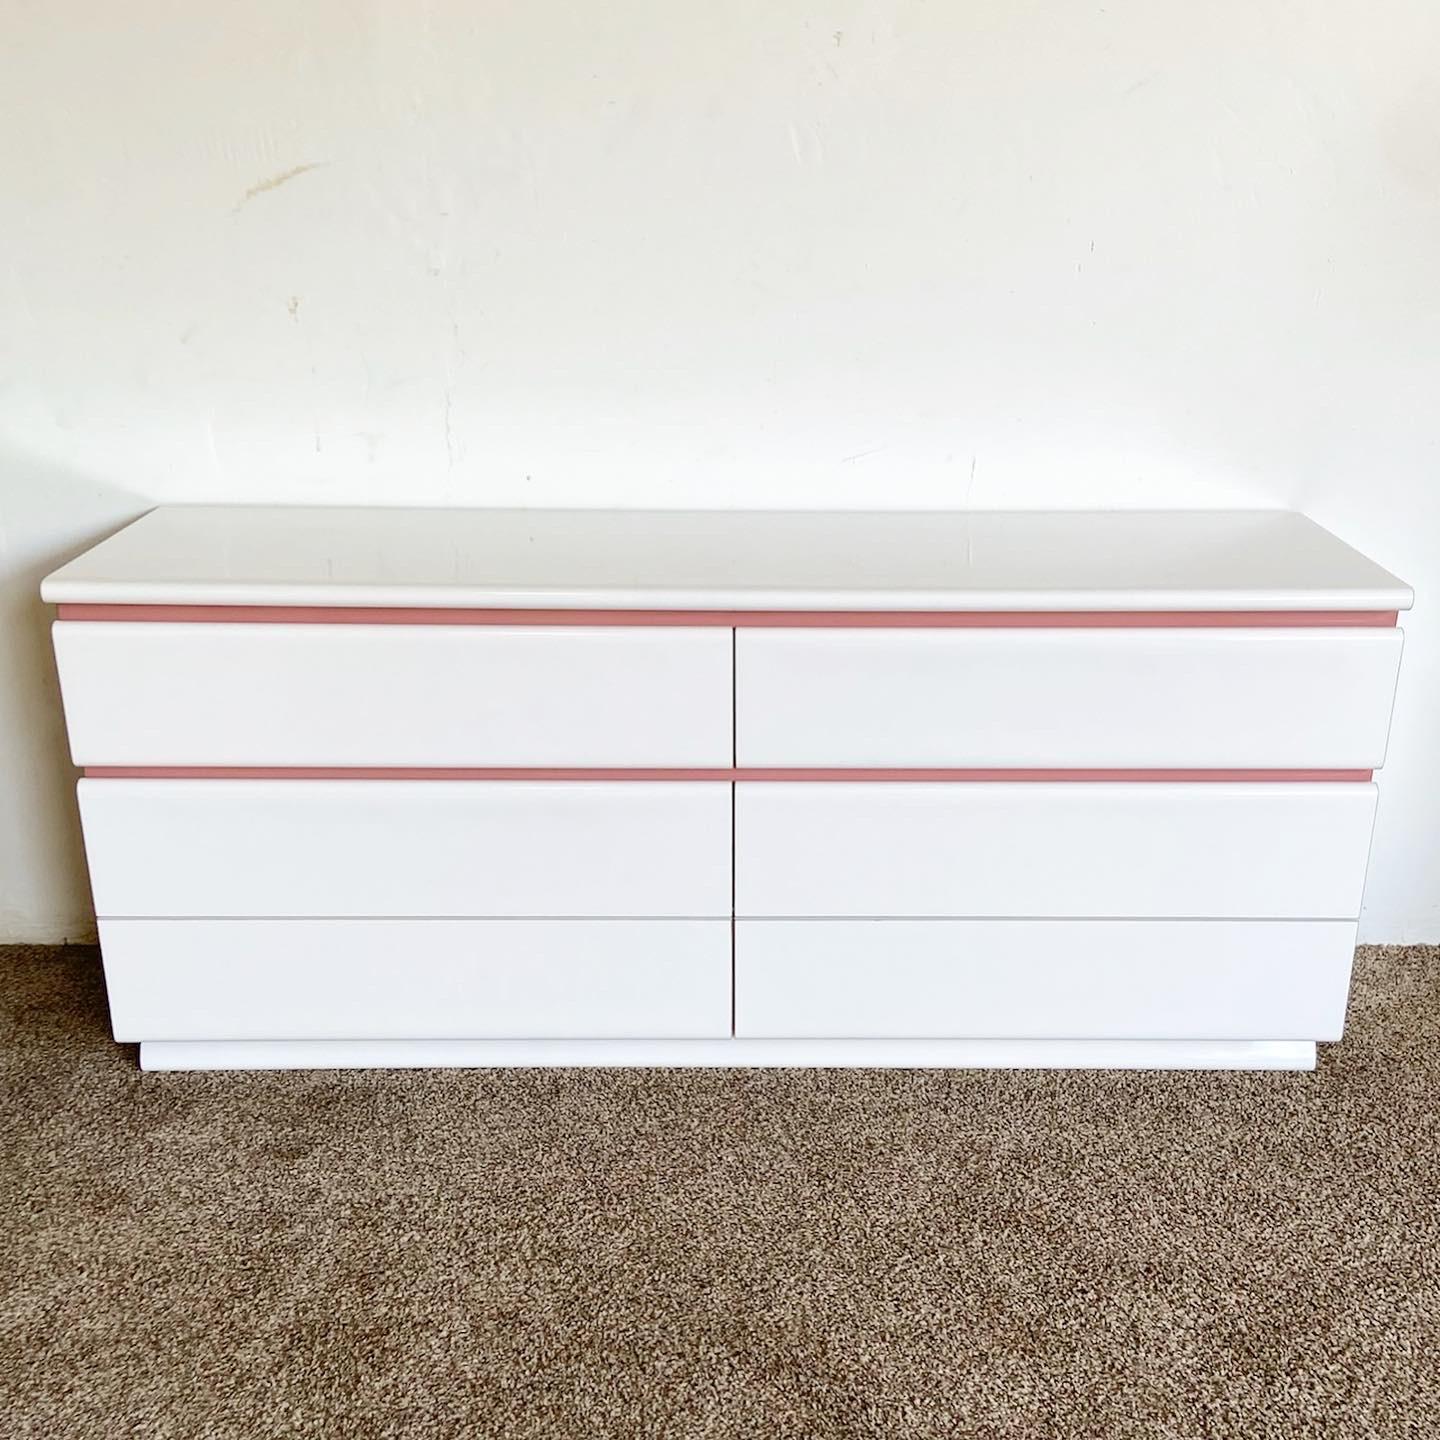 Wonderful vintage postmodern dresser with 6 large drawers. Features a white and mauve pink lacquer laminate.

Mirror measures 49.25”W, 1.5”D, 32.5”H.